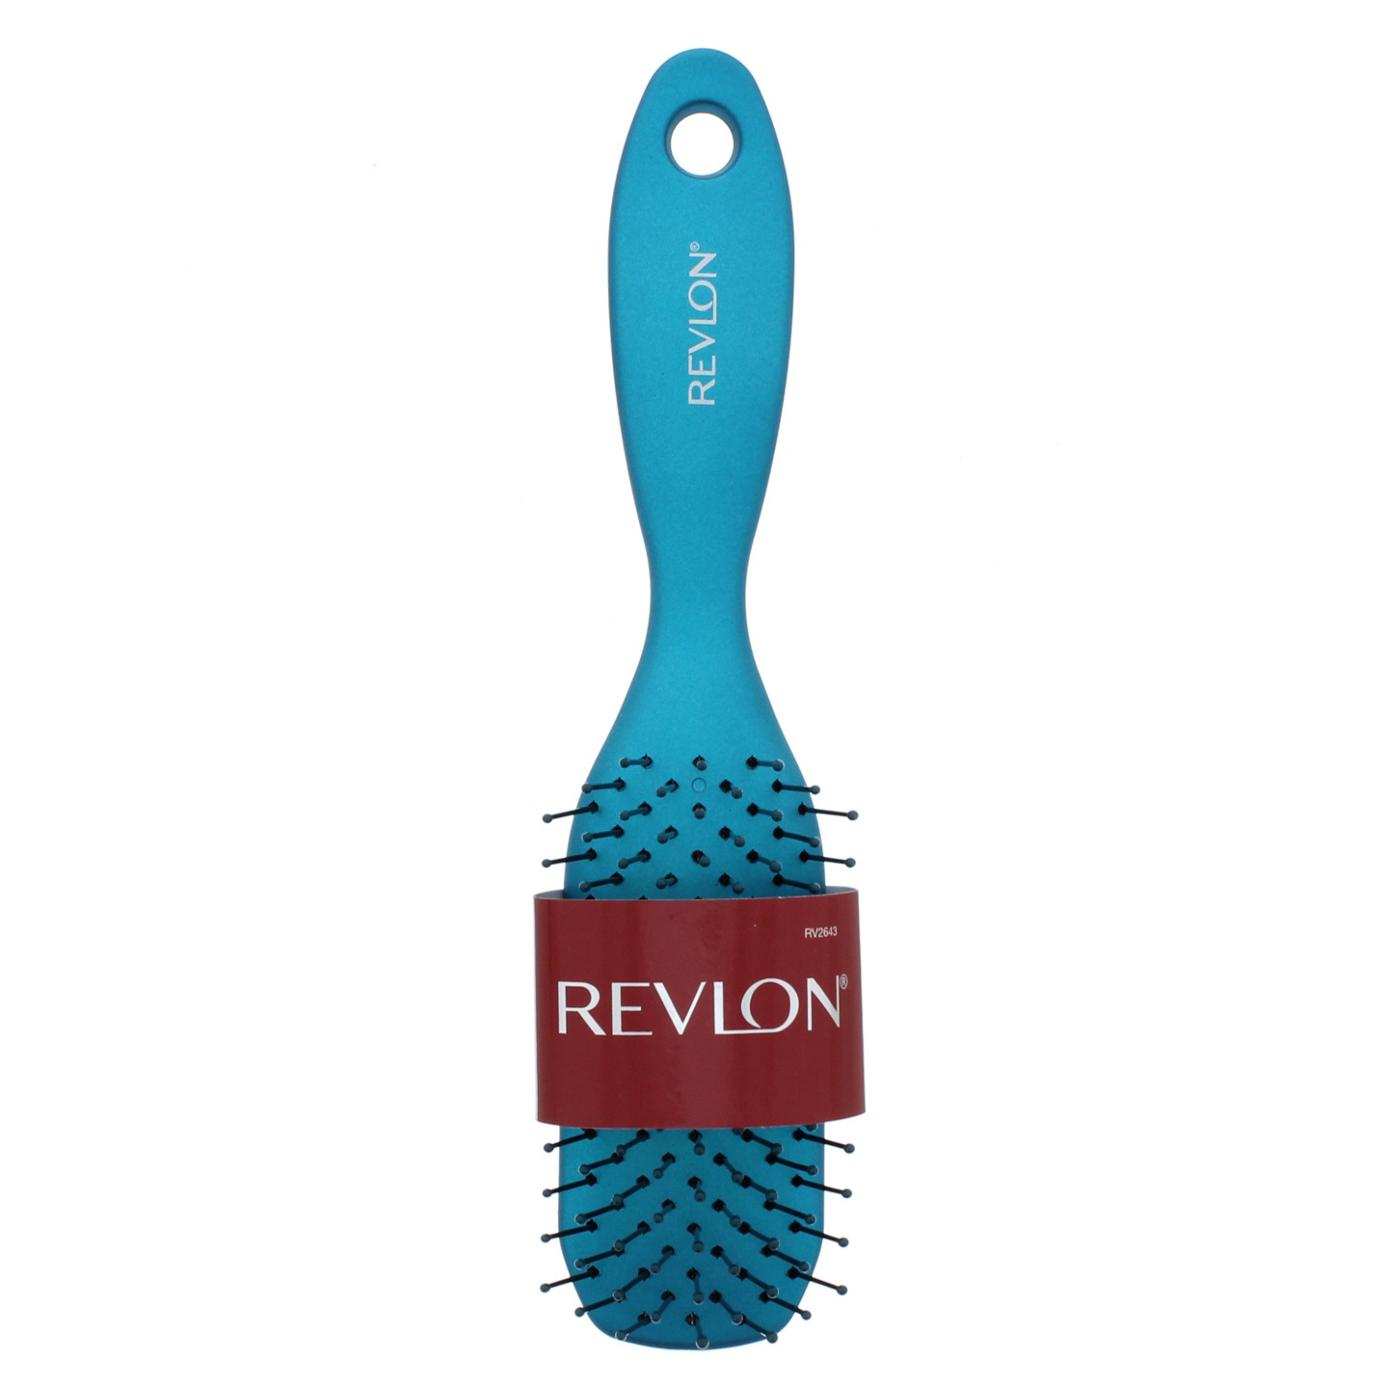 Revlon Soft Touch All Purpose Brush, Assorted Colors; image 3 of 3